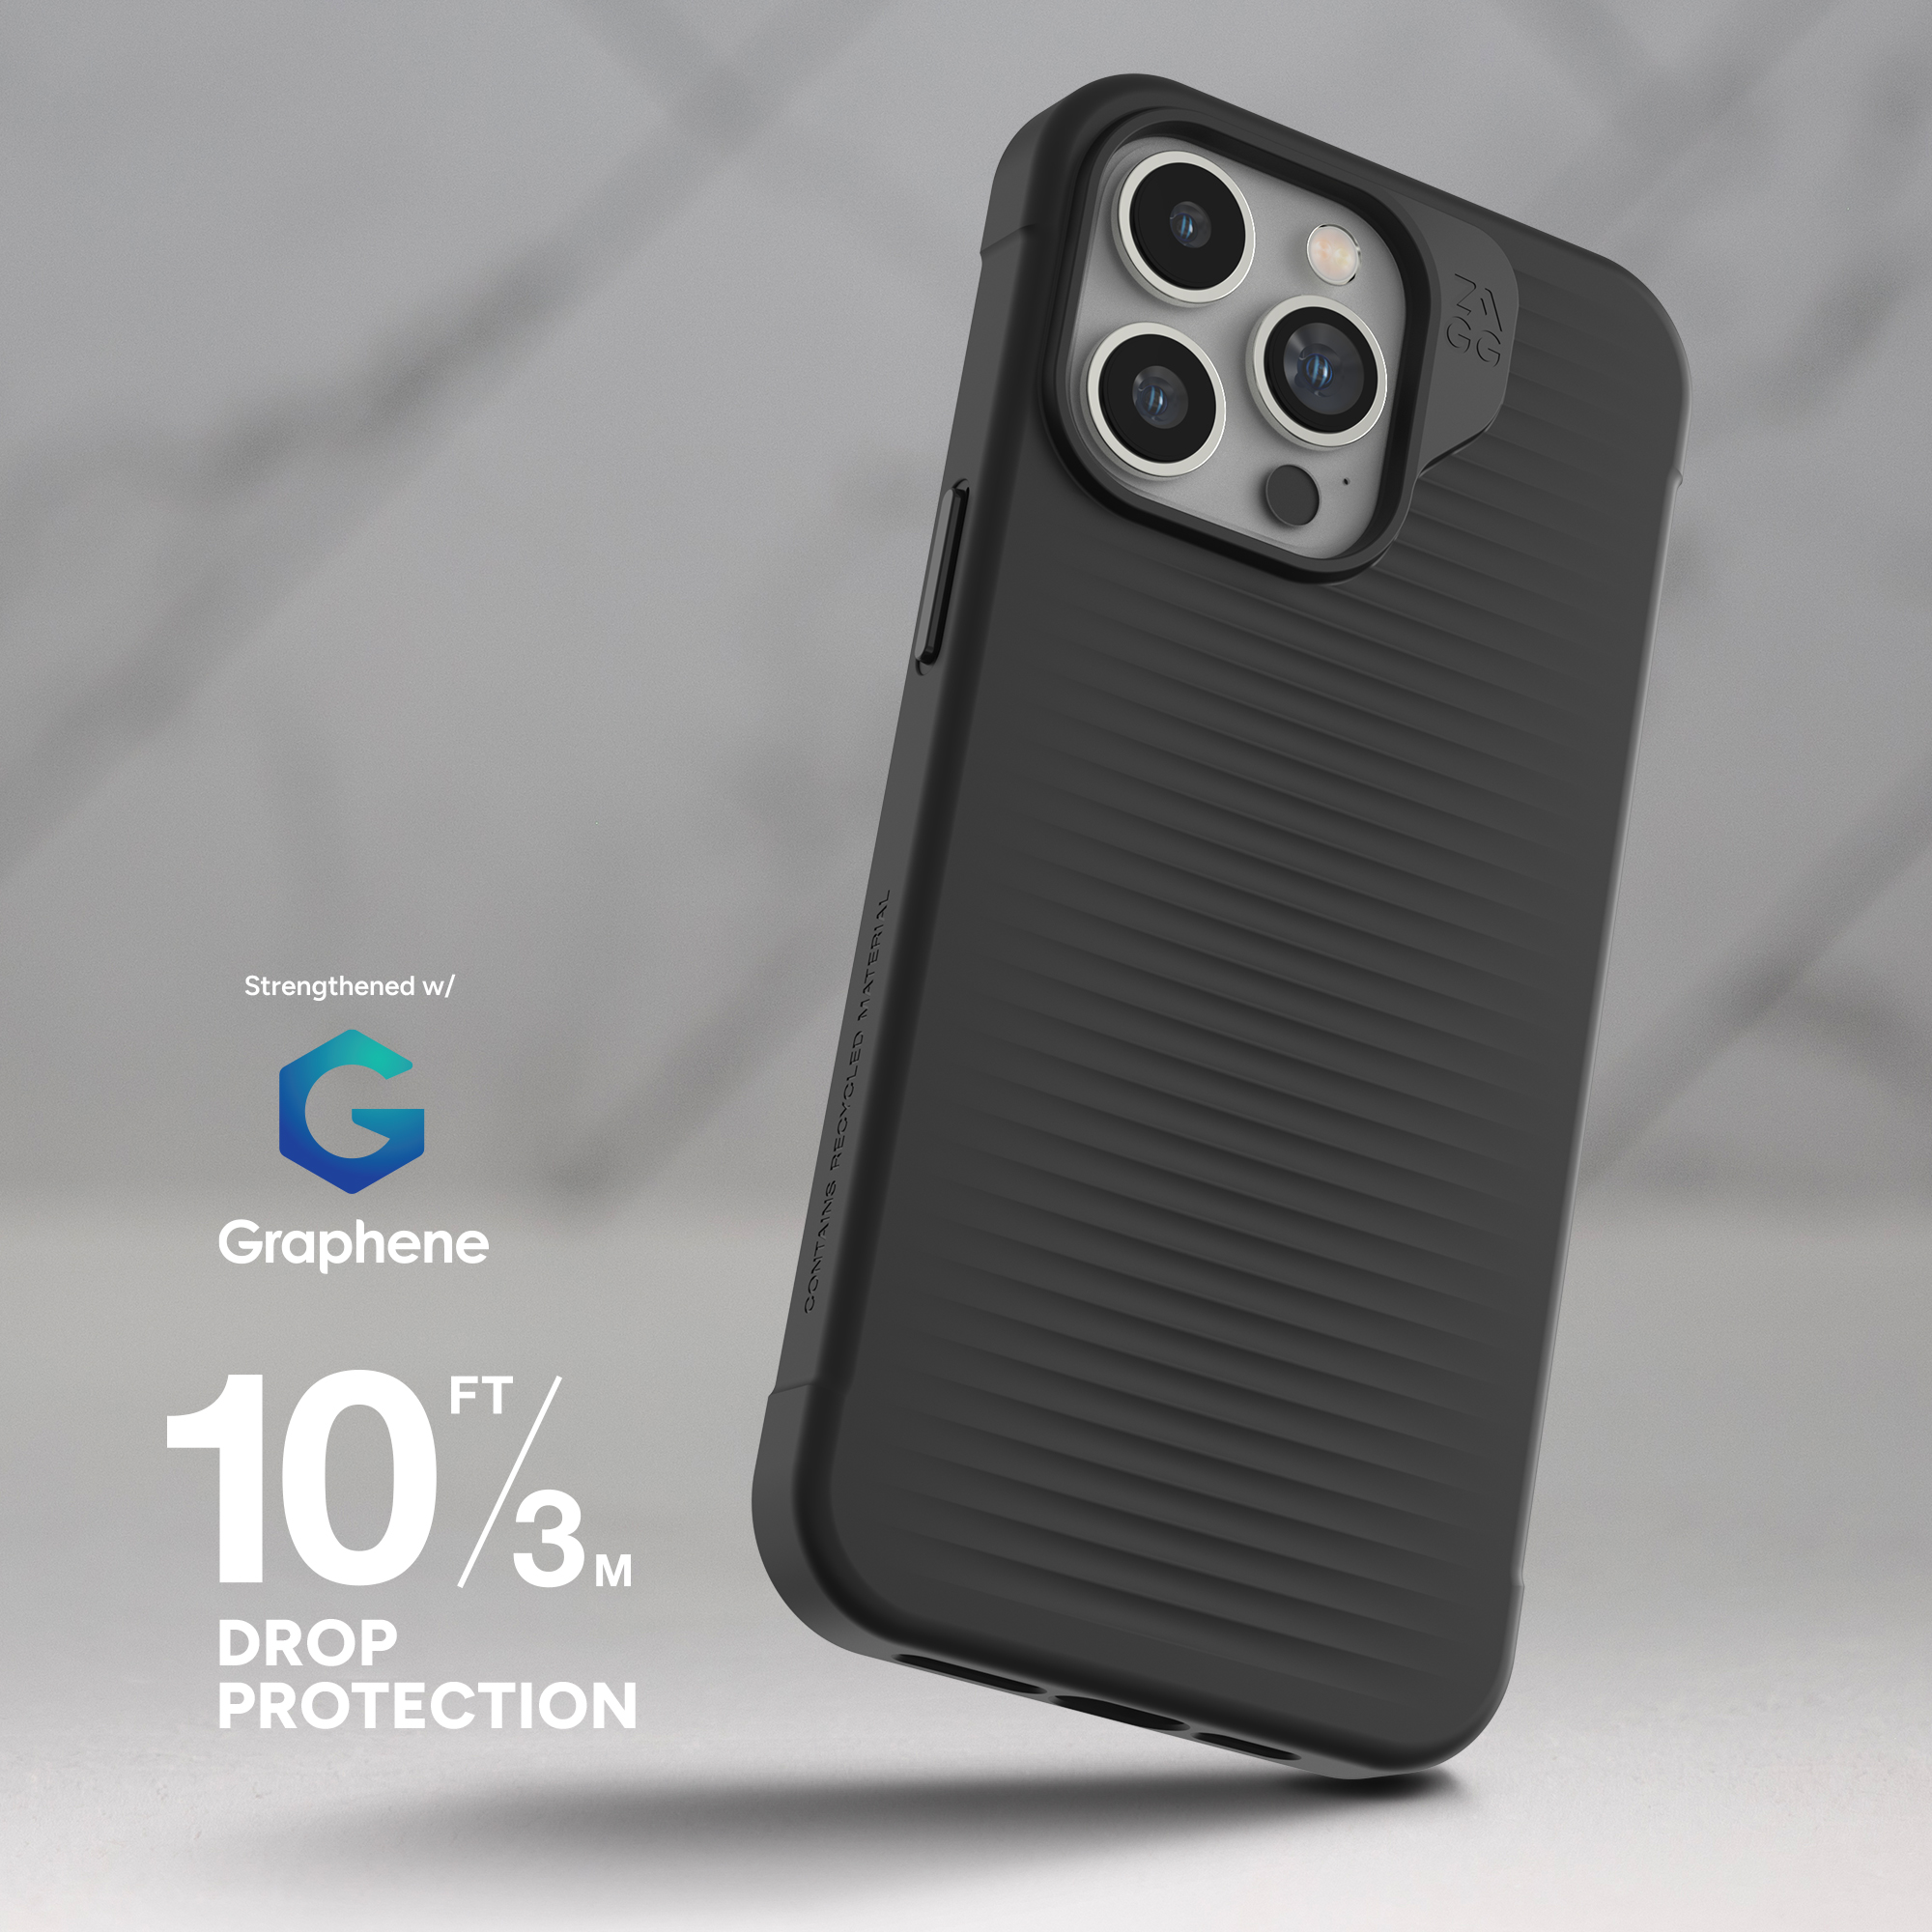 Drop Resistant up to 10ft│ 3m 
||Luxe protects your phone from drops up to 10 feet (3 meters). (1)